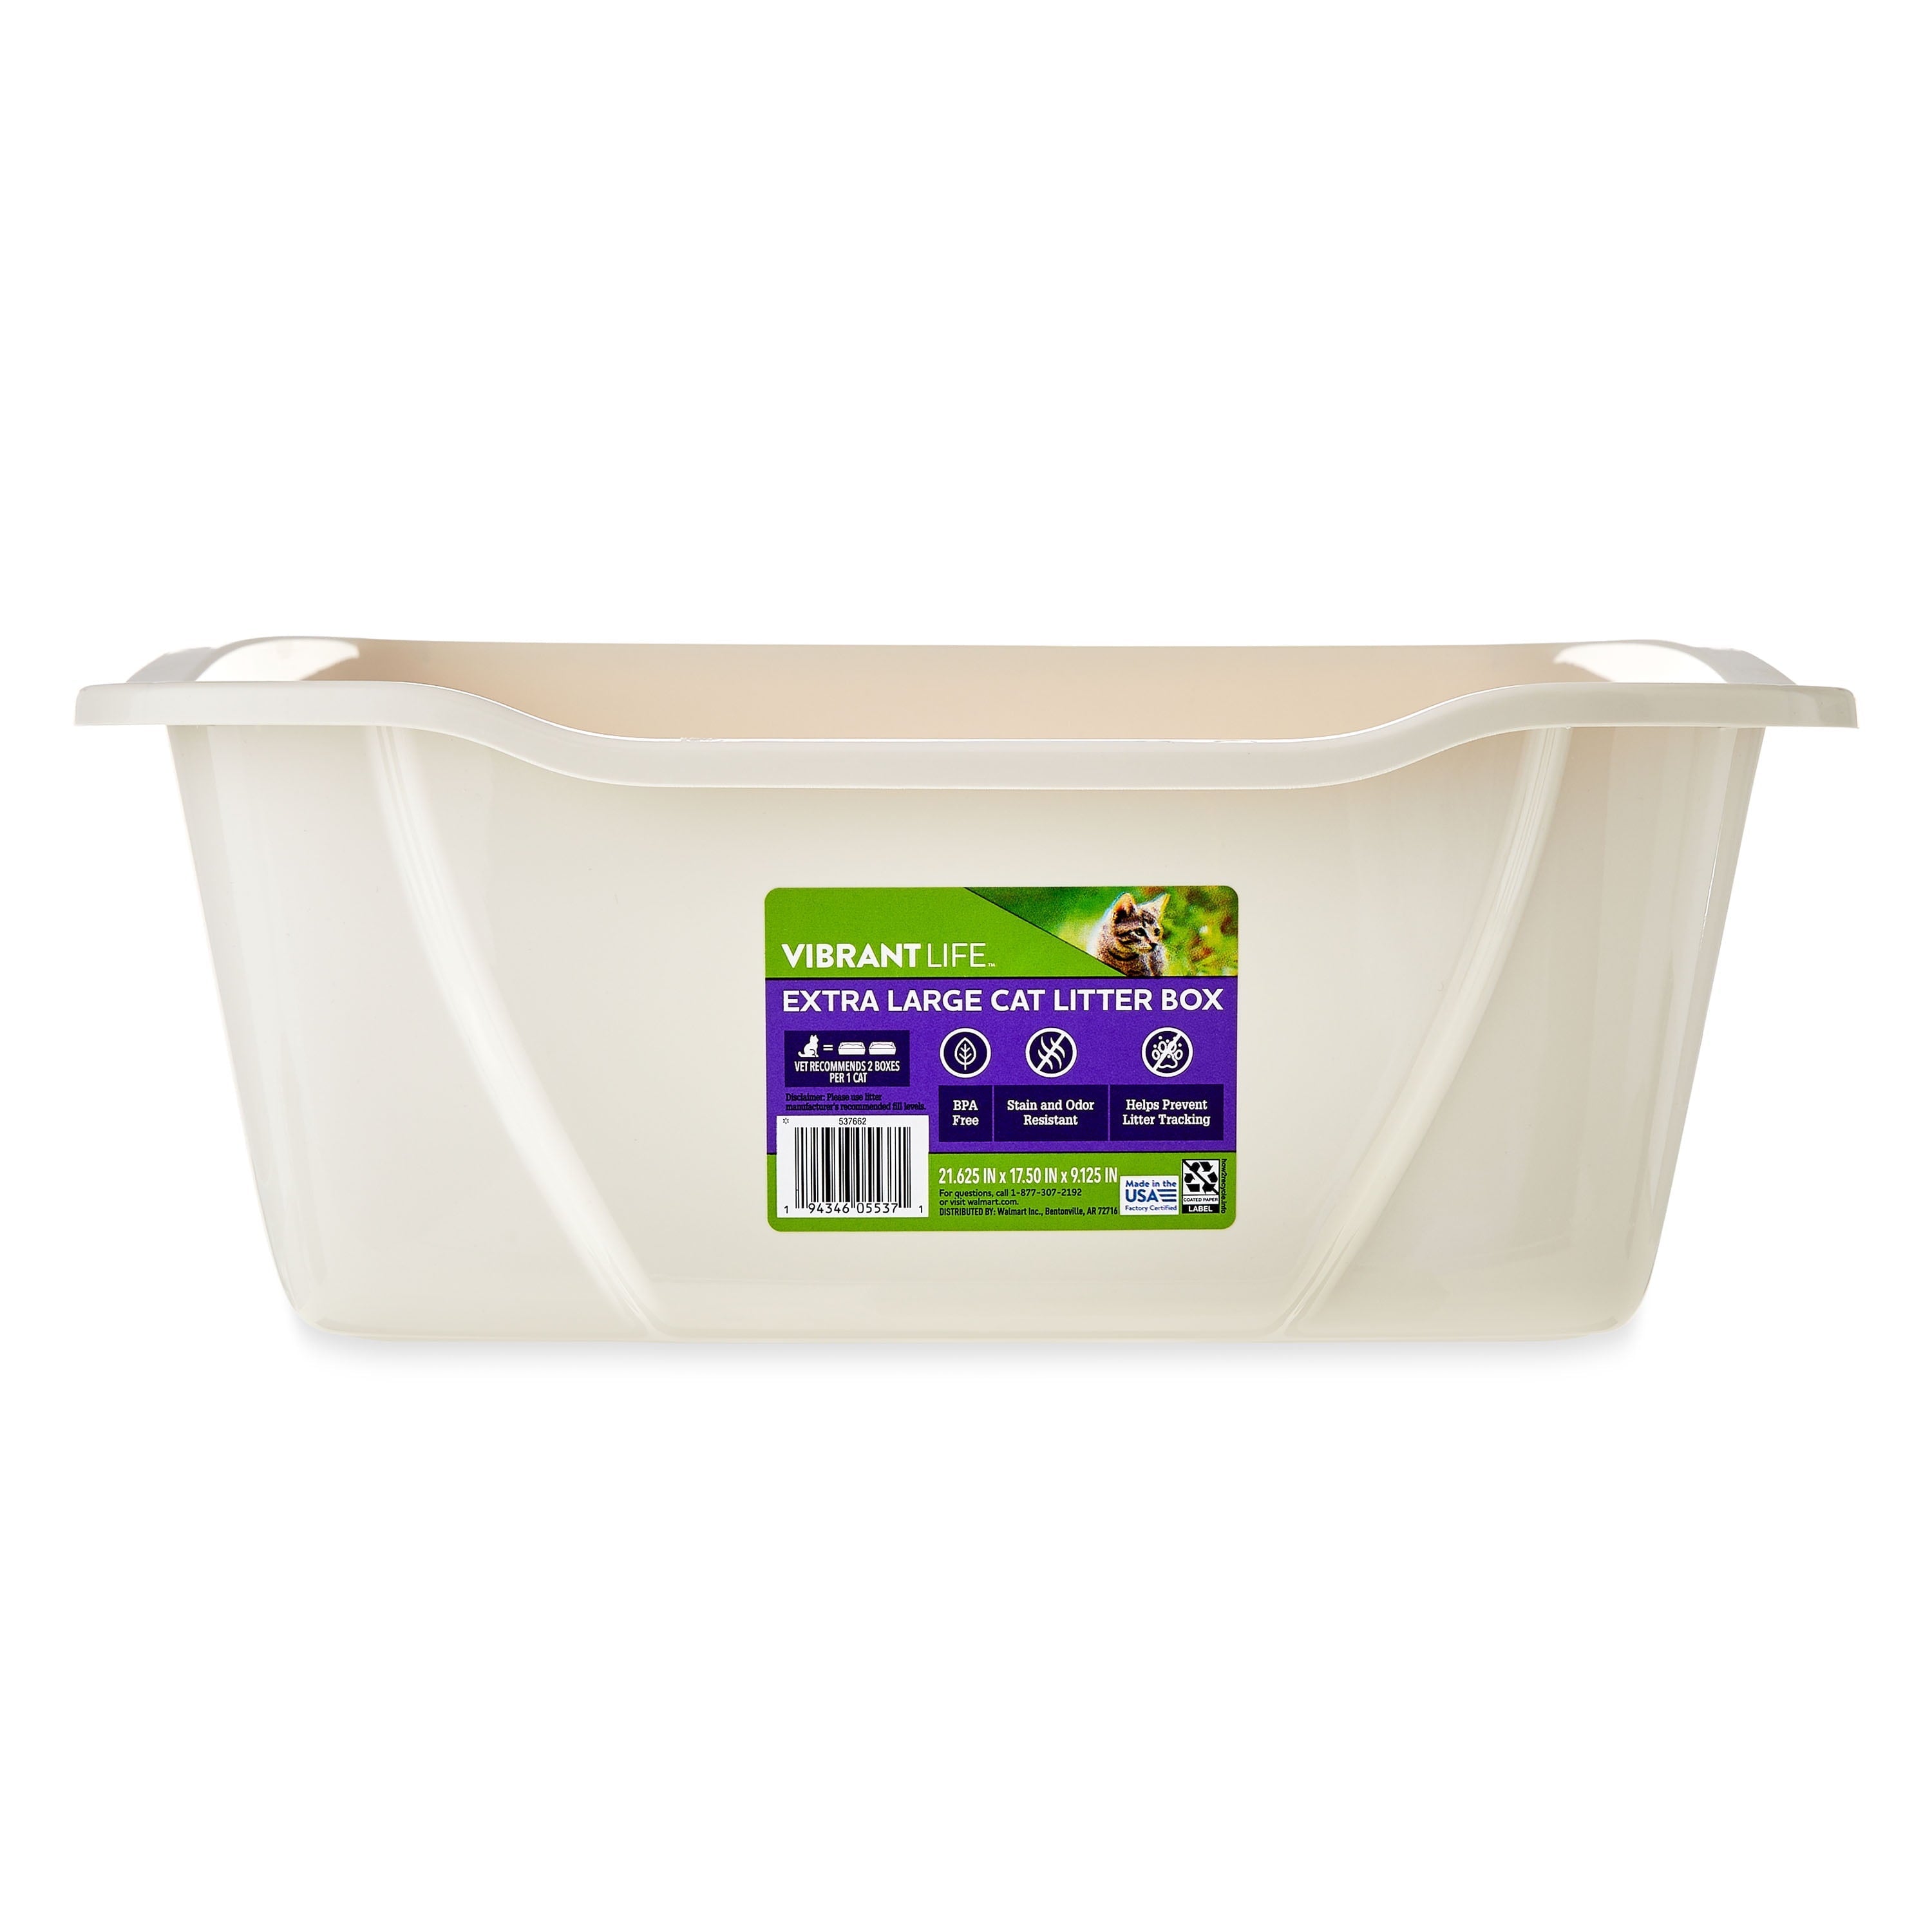 Wholesale prices with free shipping all over United States Vibrant Life Extra Large Cat Litter Box - Steven Deals